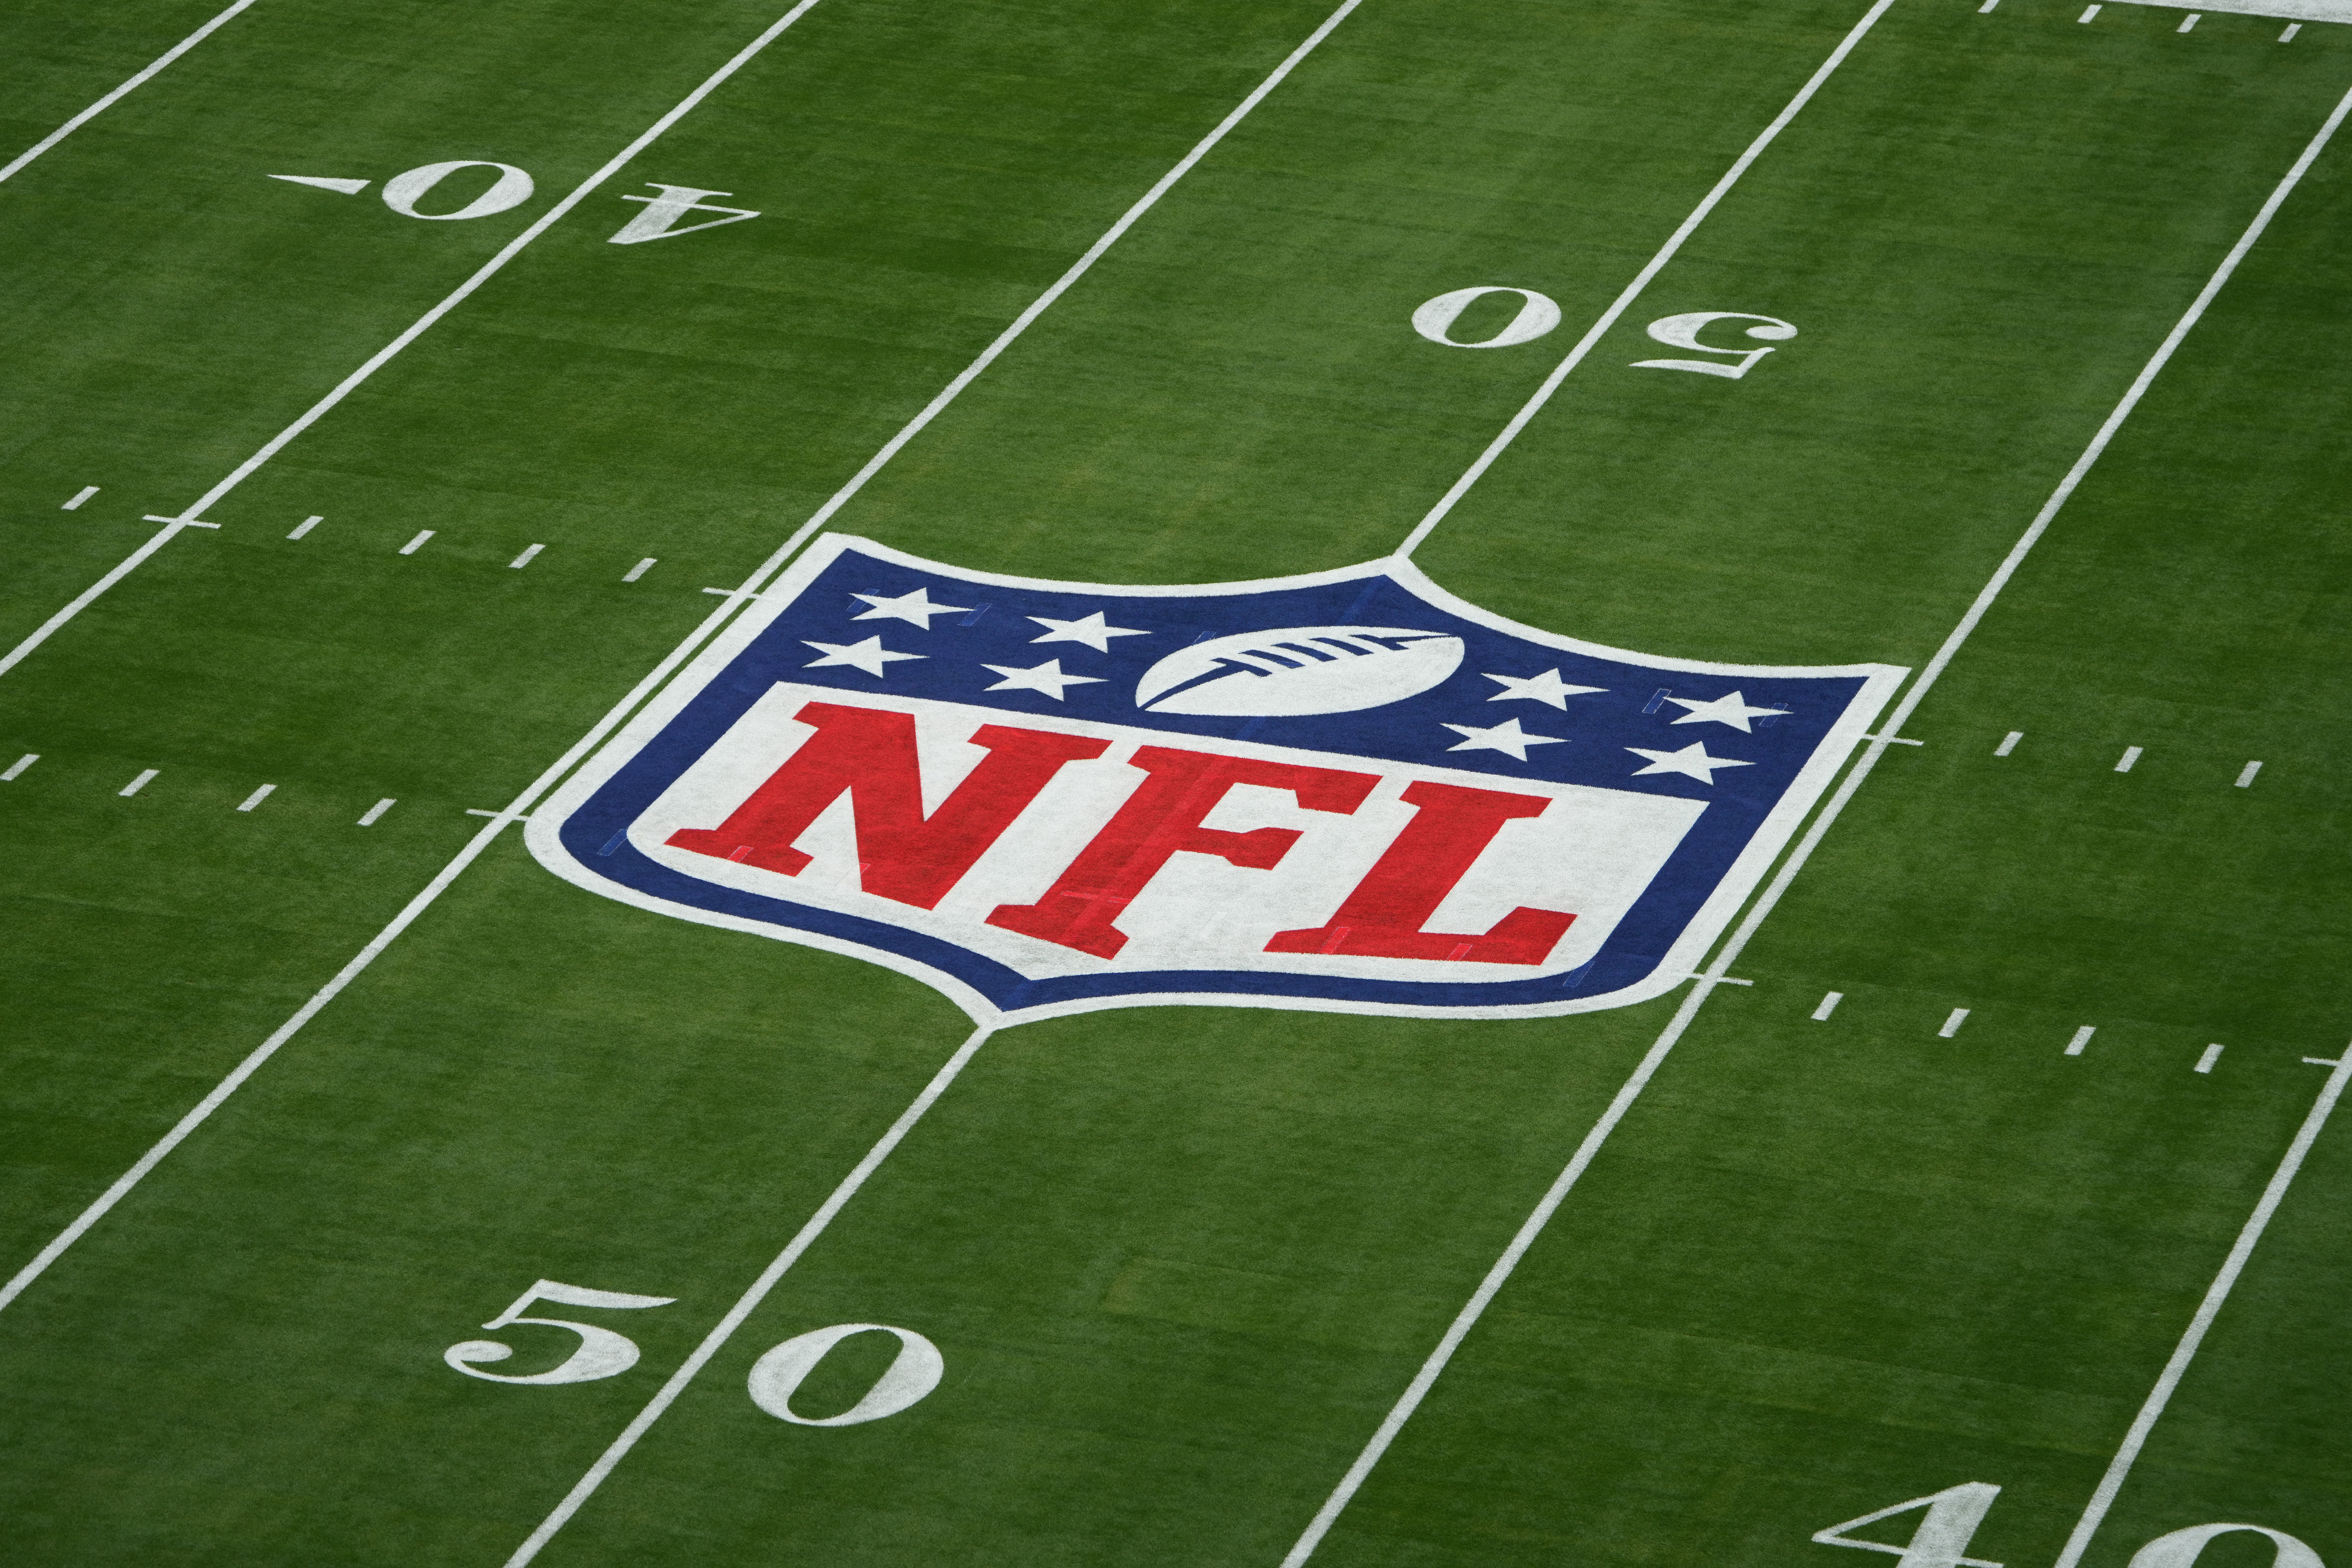 where is today's nfl game being played